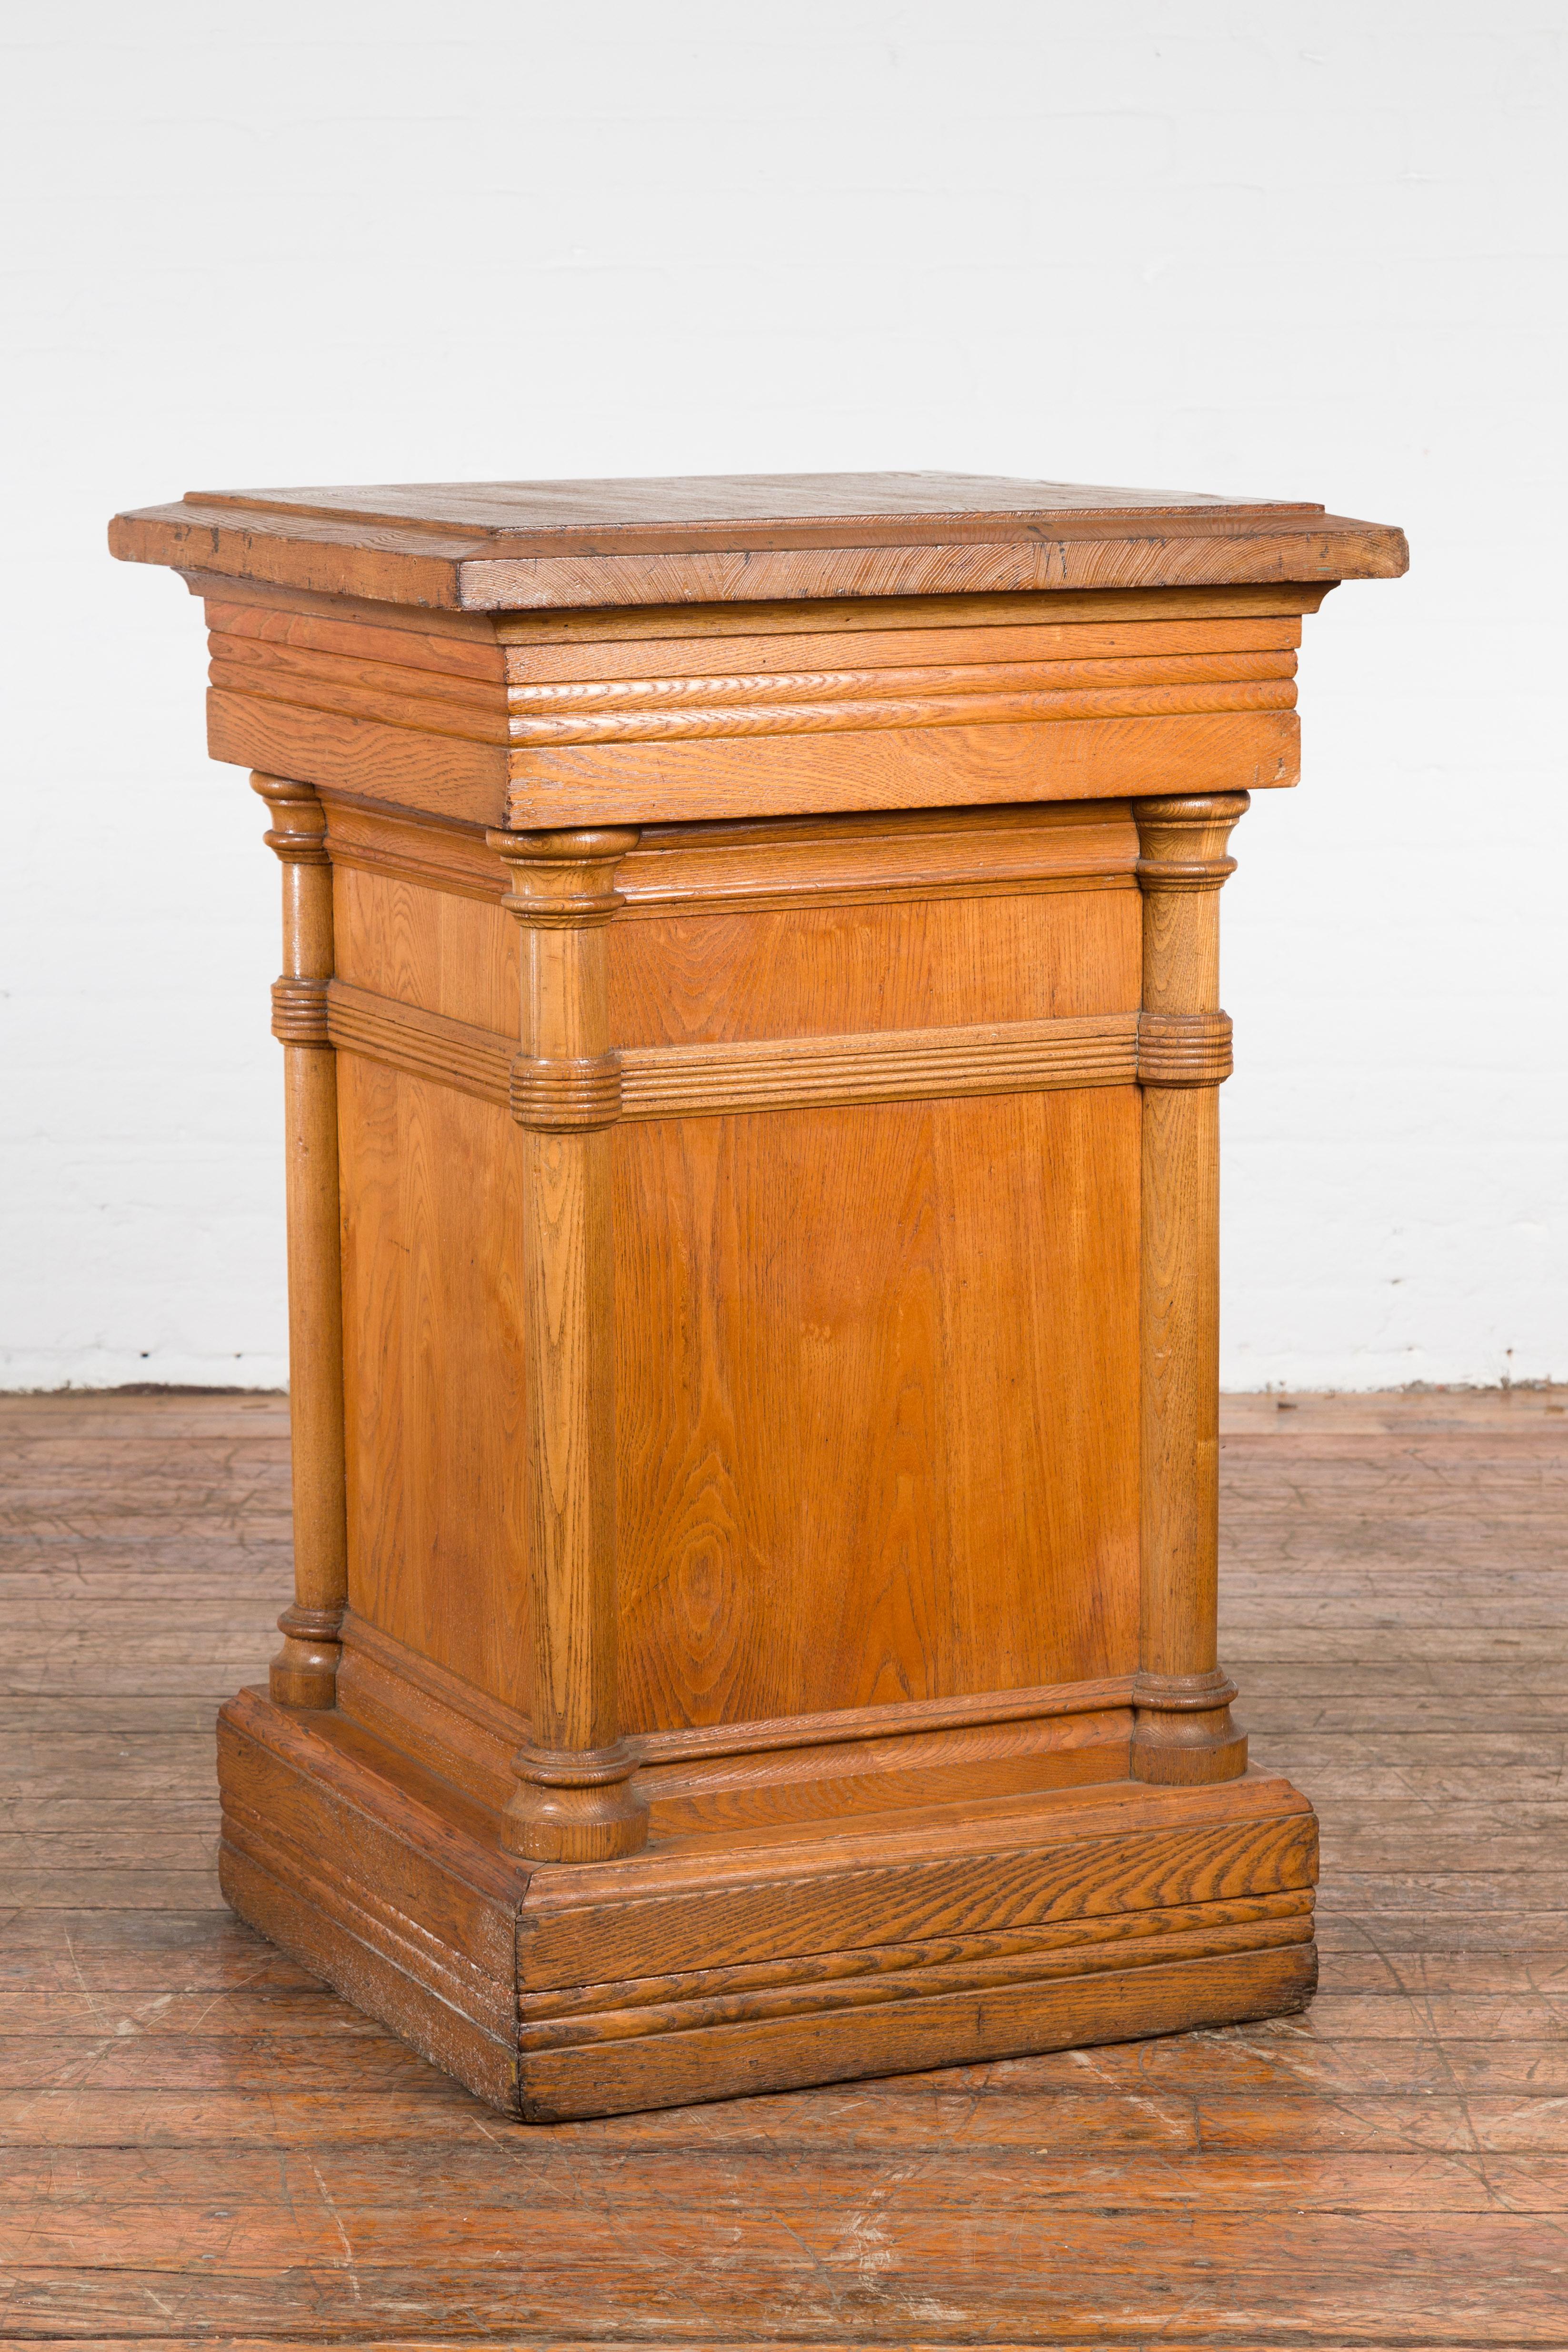 A vintage Indonesian nicely grained wooden pedestal from the mid 20th century, with Doric style semi-columns and natural patina. Created in Indonesia during the midcentury period, this wooden pedestal features a square top with beveled edges,